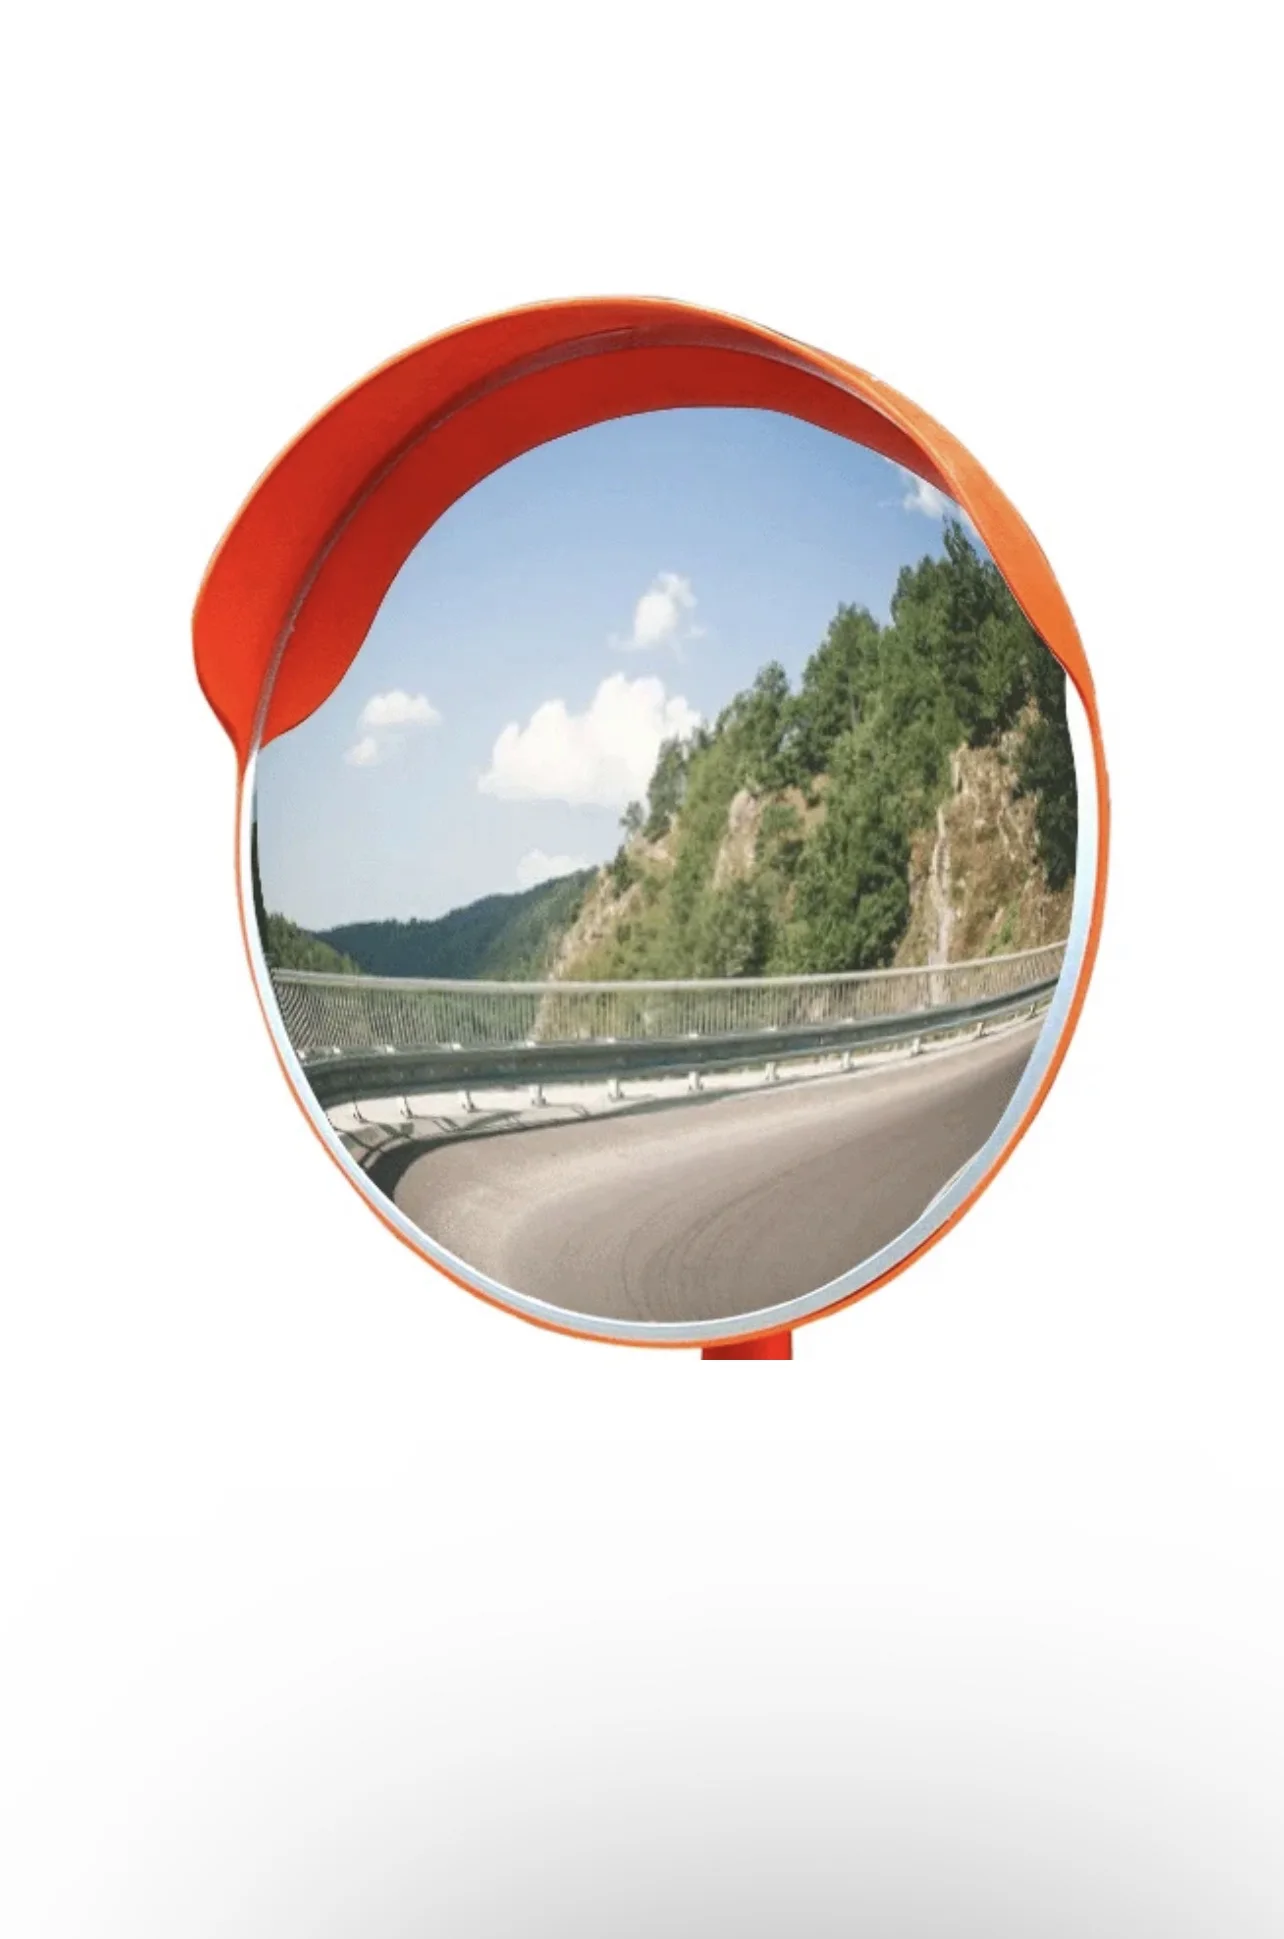 Convex Mirror For Road Safety Used In U-Turn- 45cm